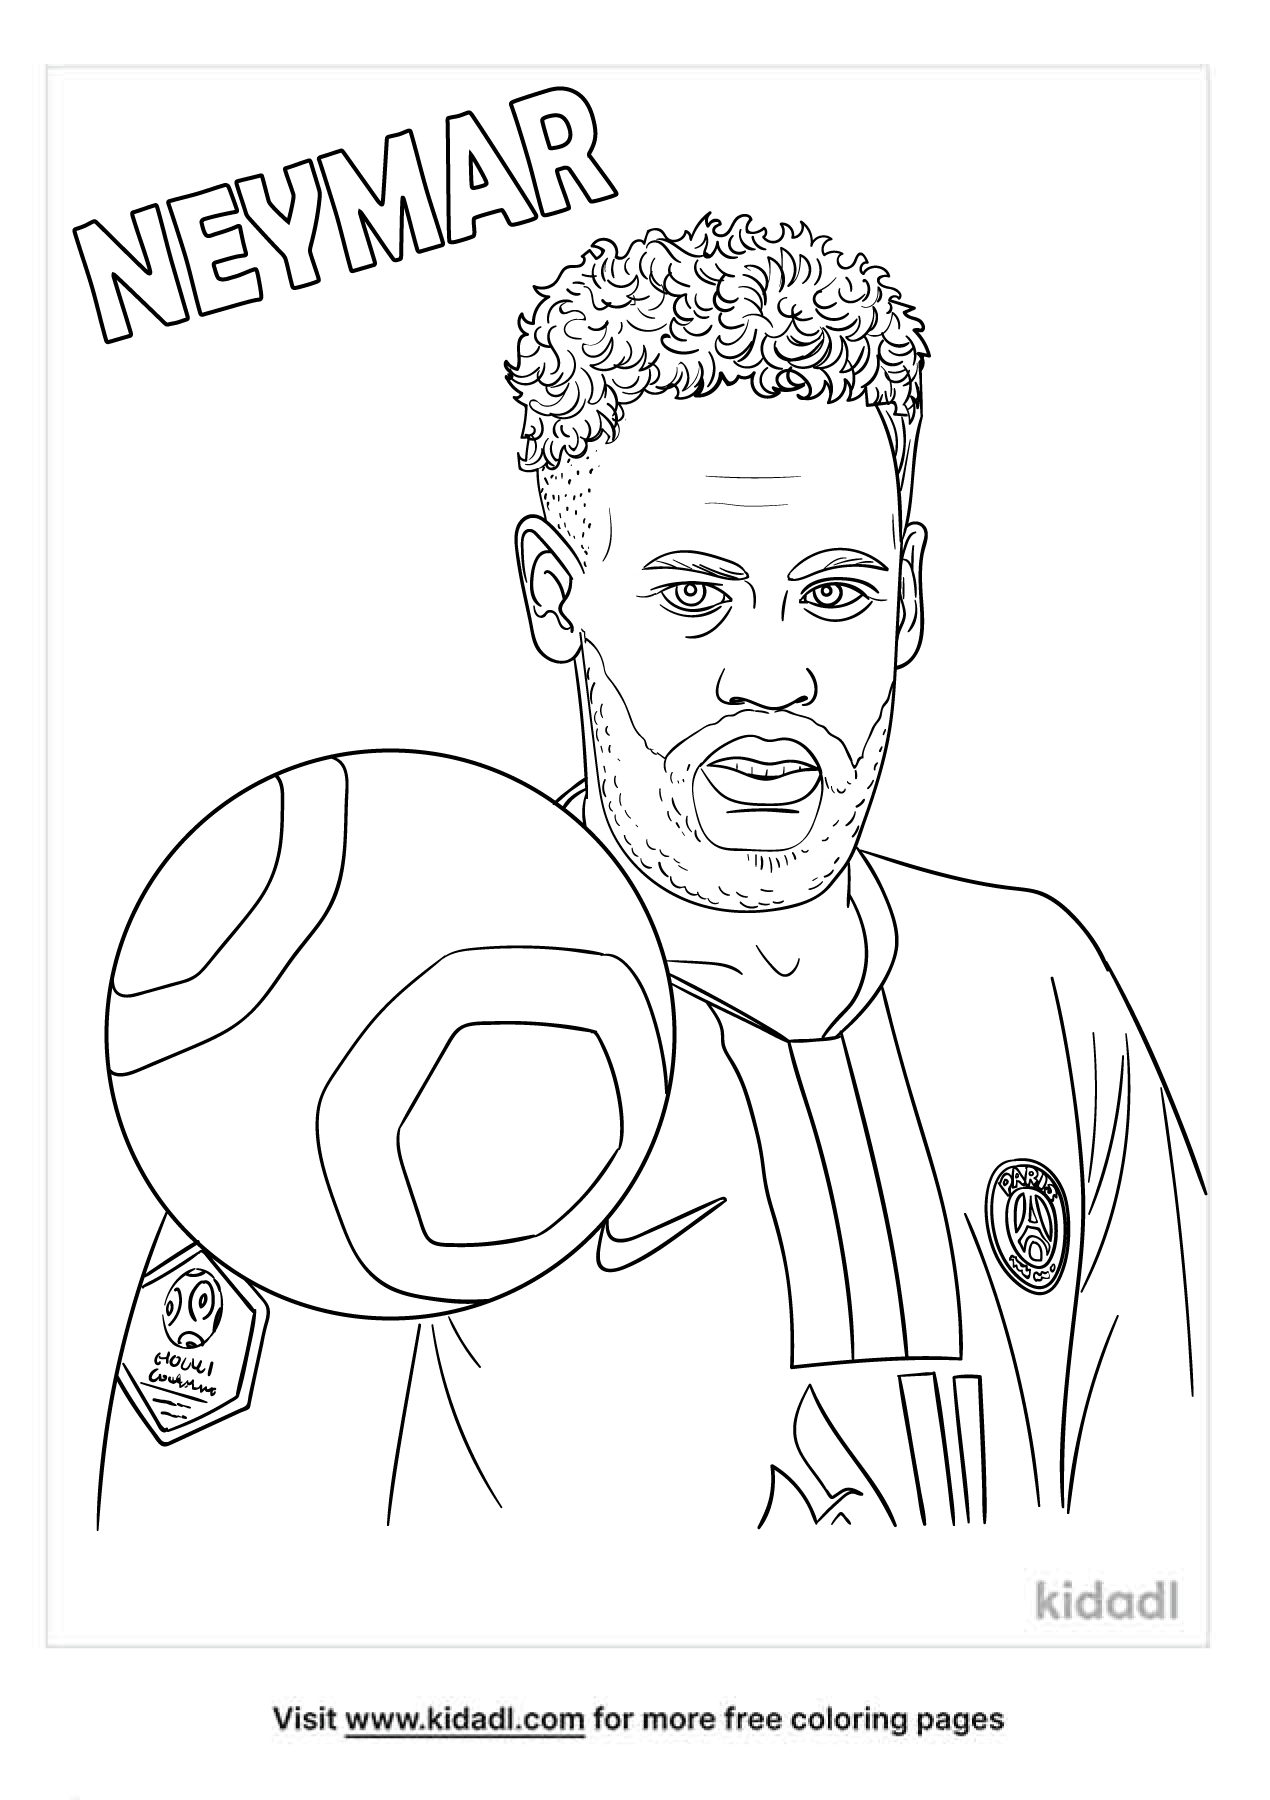 Neymar Coloring Pages | Free People-and-celebrities Coloring Pages | Kidadl